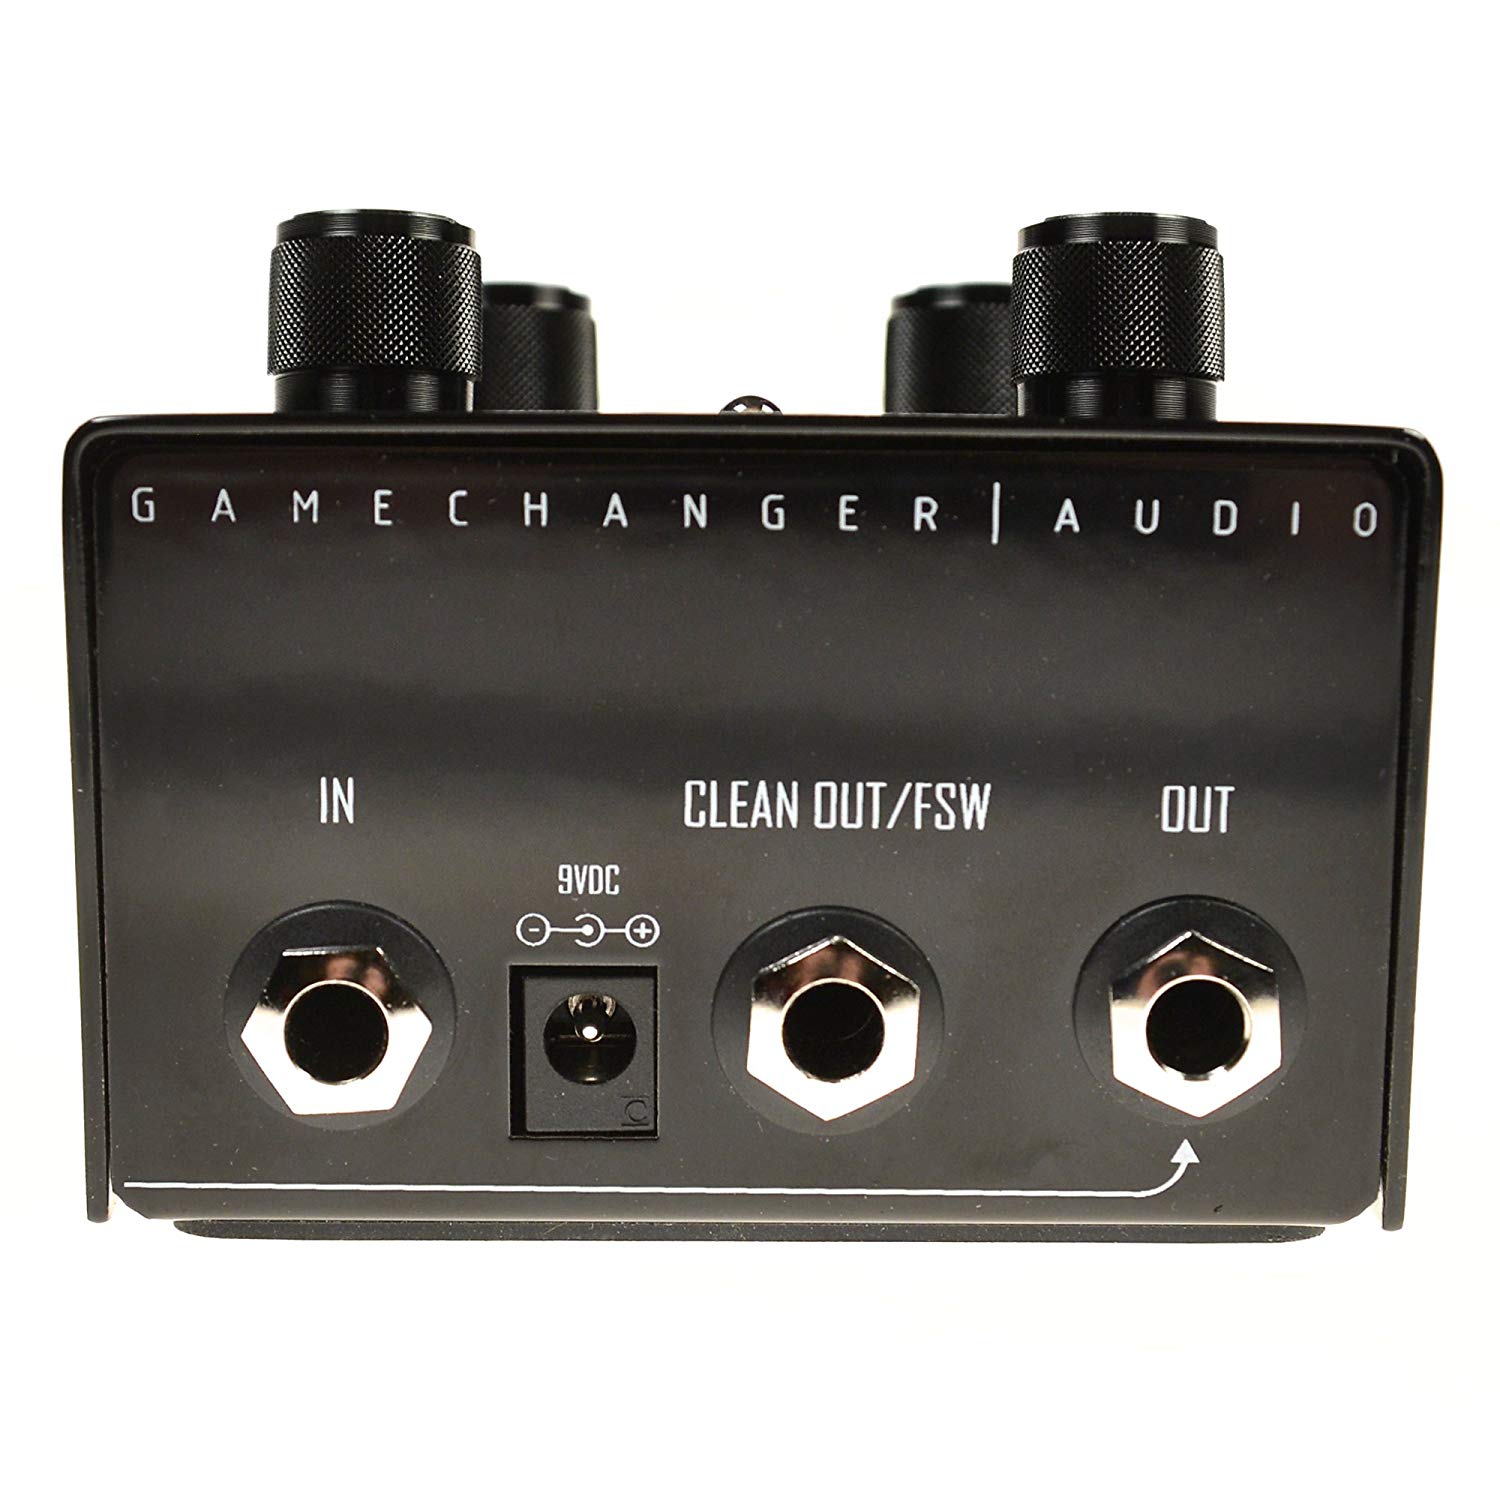 Game Changer Plus Pedal Sustain - Compressor/sustain/noise gate effect pedaal - Variation 2